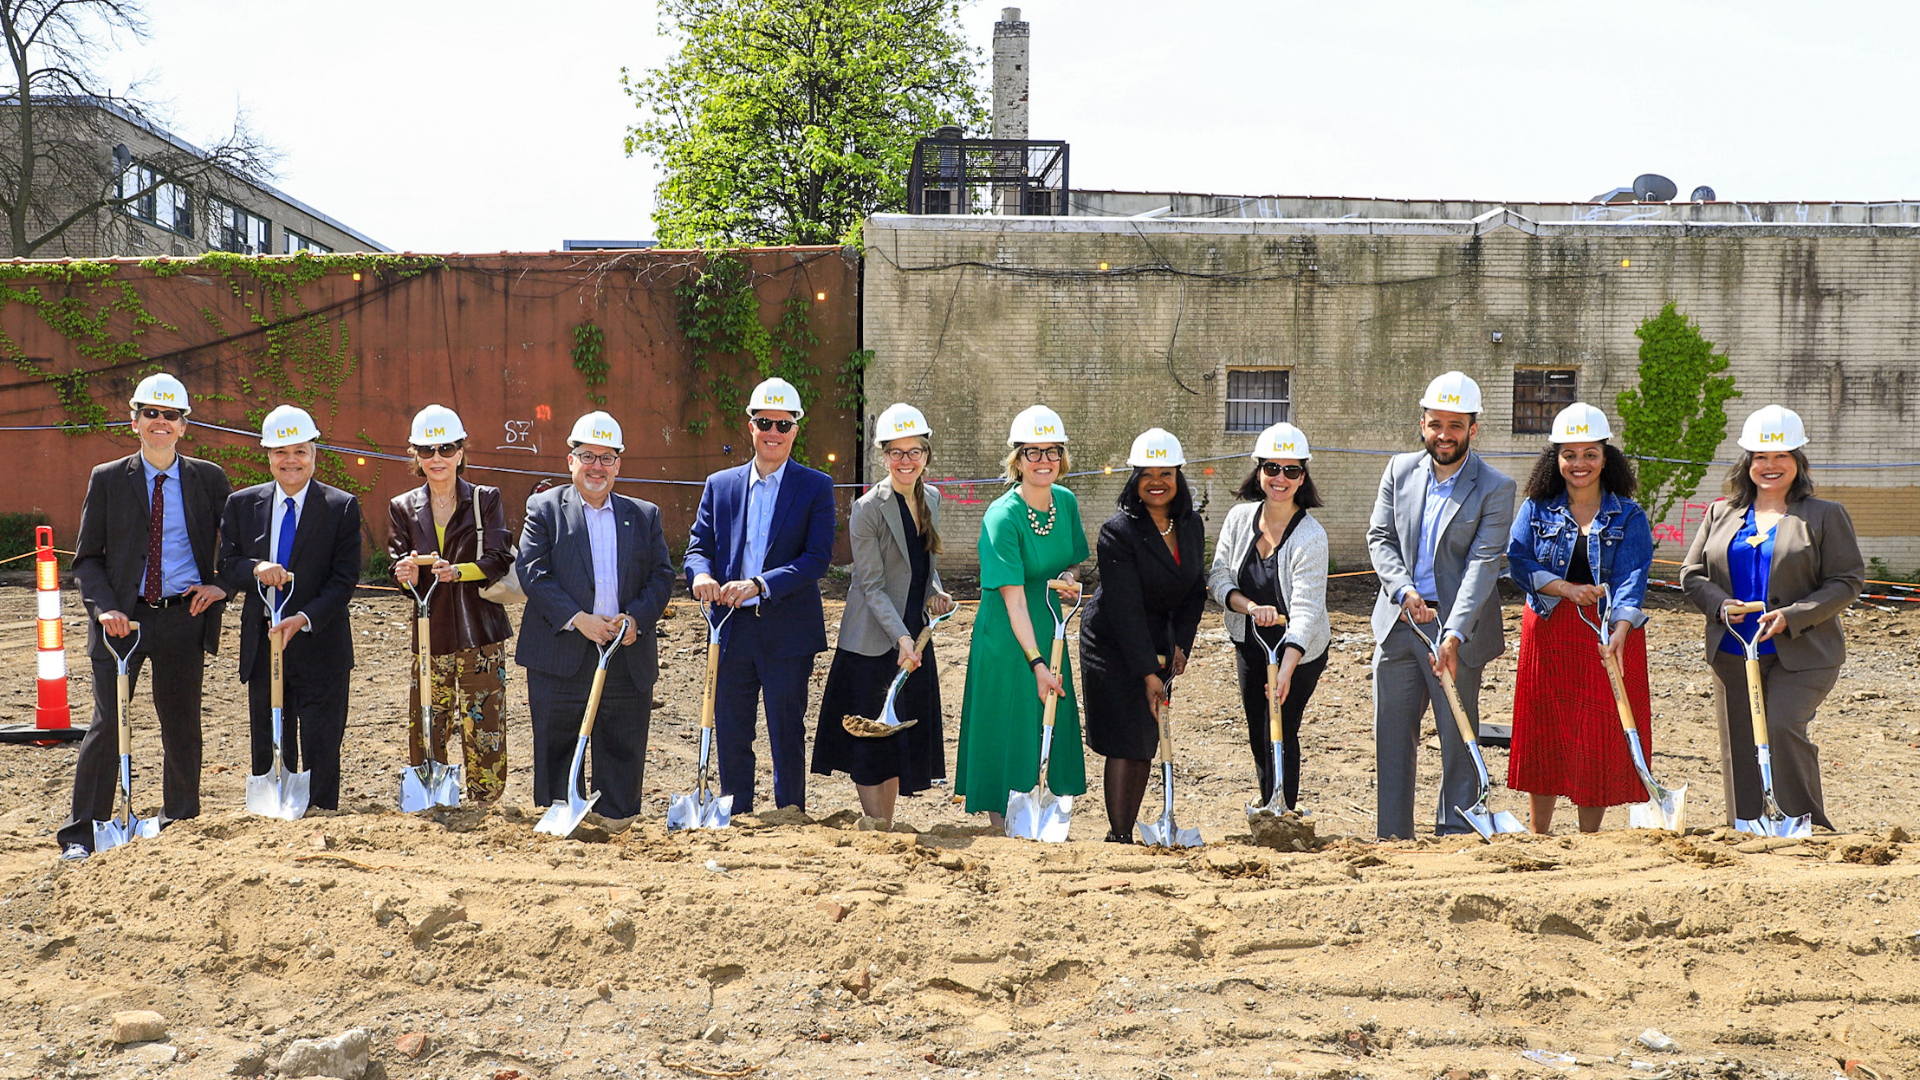 Governor Hochul Announces Start of Construction on 287-Unit Affordable and Supportive Housing Development in Brooklyn